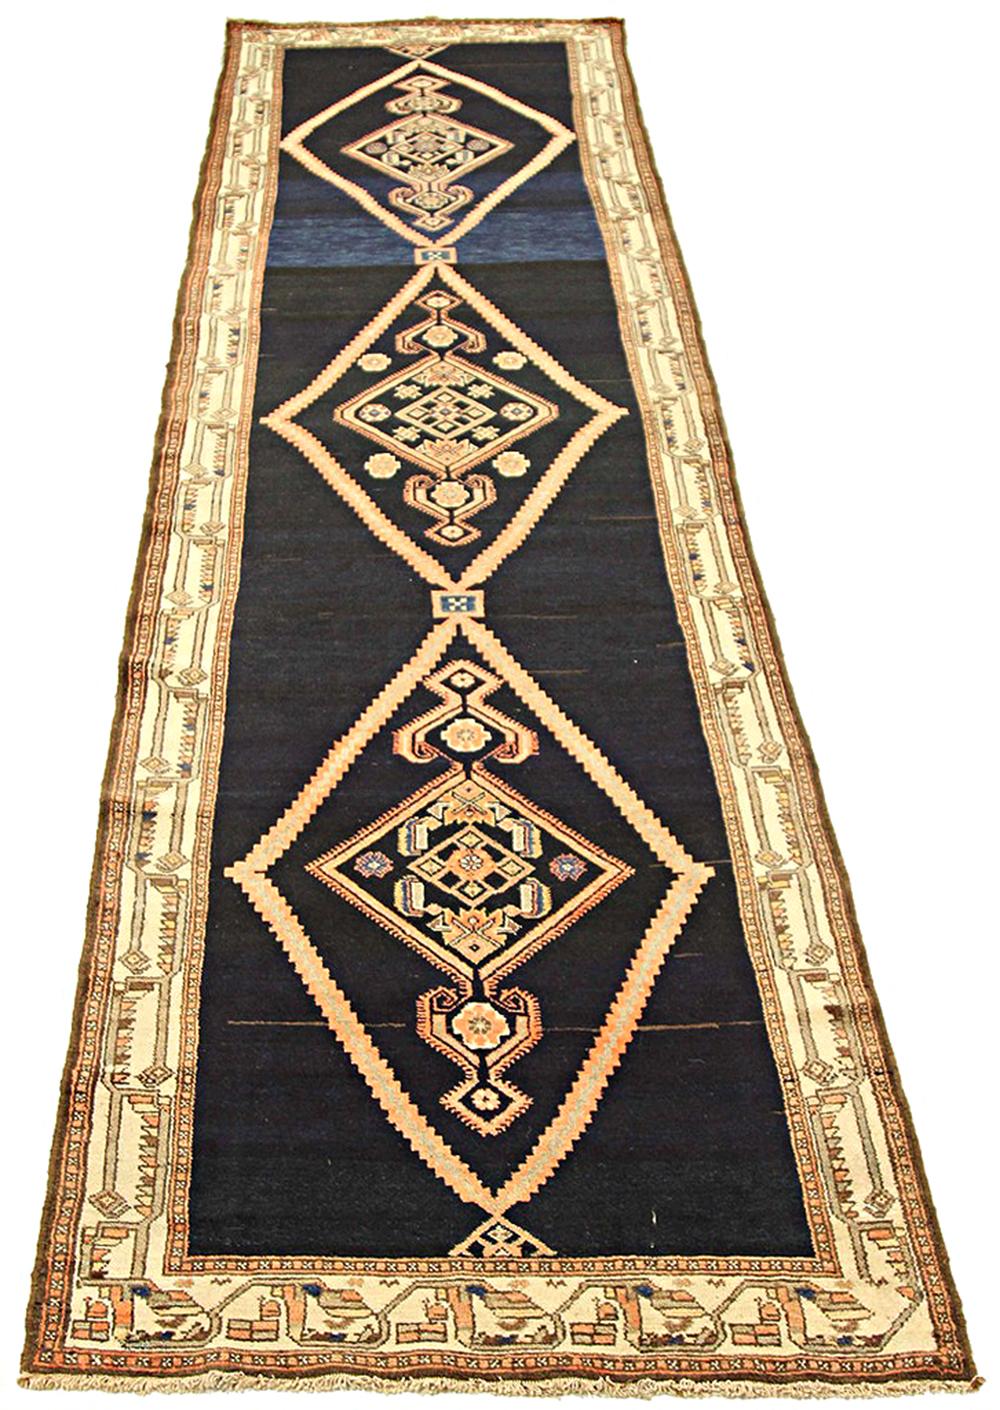 Antique Persian runner rug handwoven from the finest sheep’s wool and colored with all-natural vegetable dyes that are safe for humans and pets. It’s a traditional Malayer design featuring a beautiful combination of geometric details in gray and